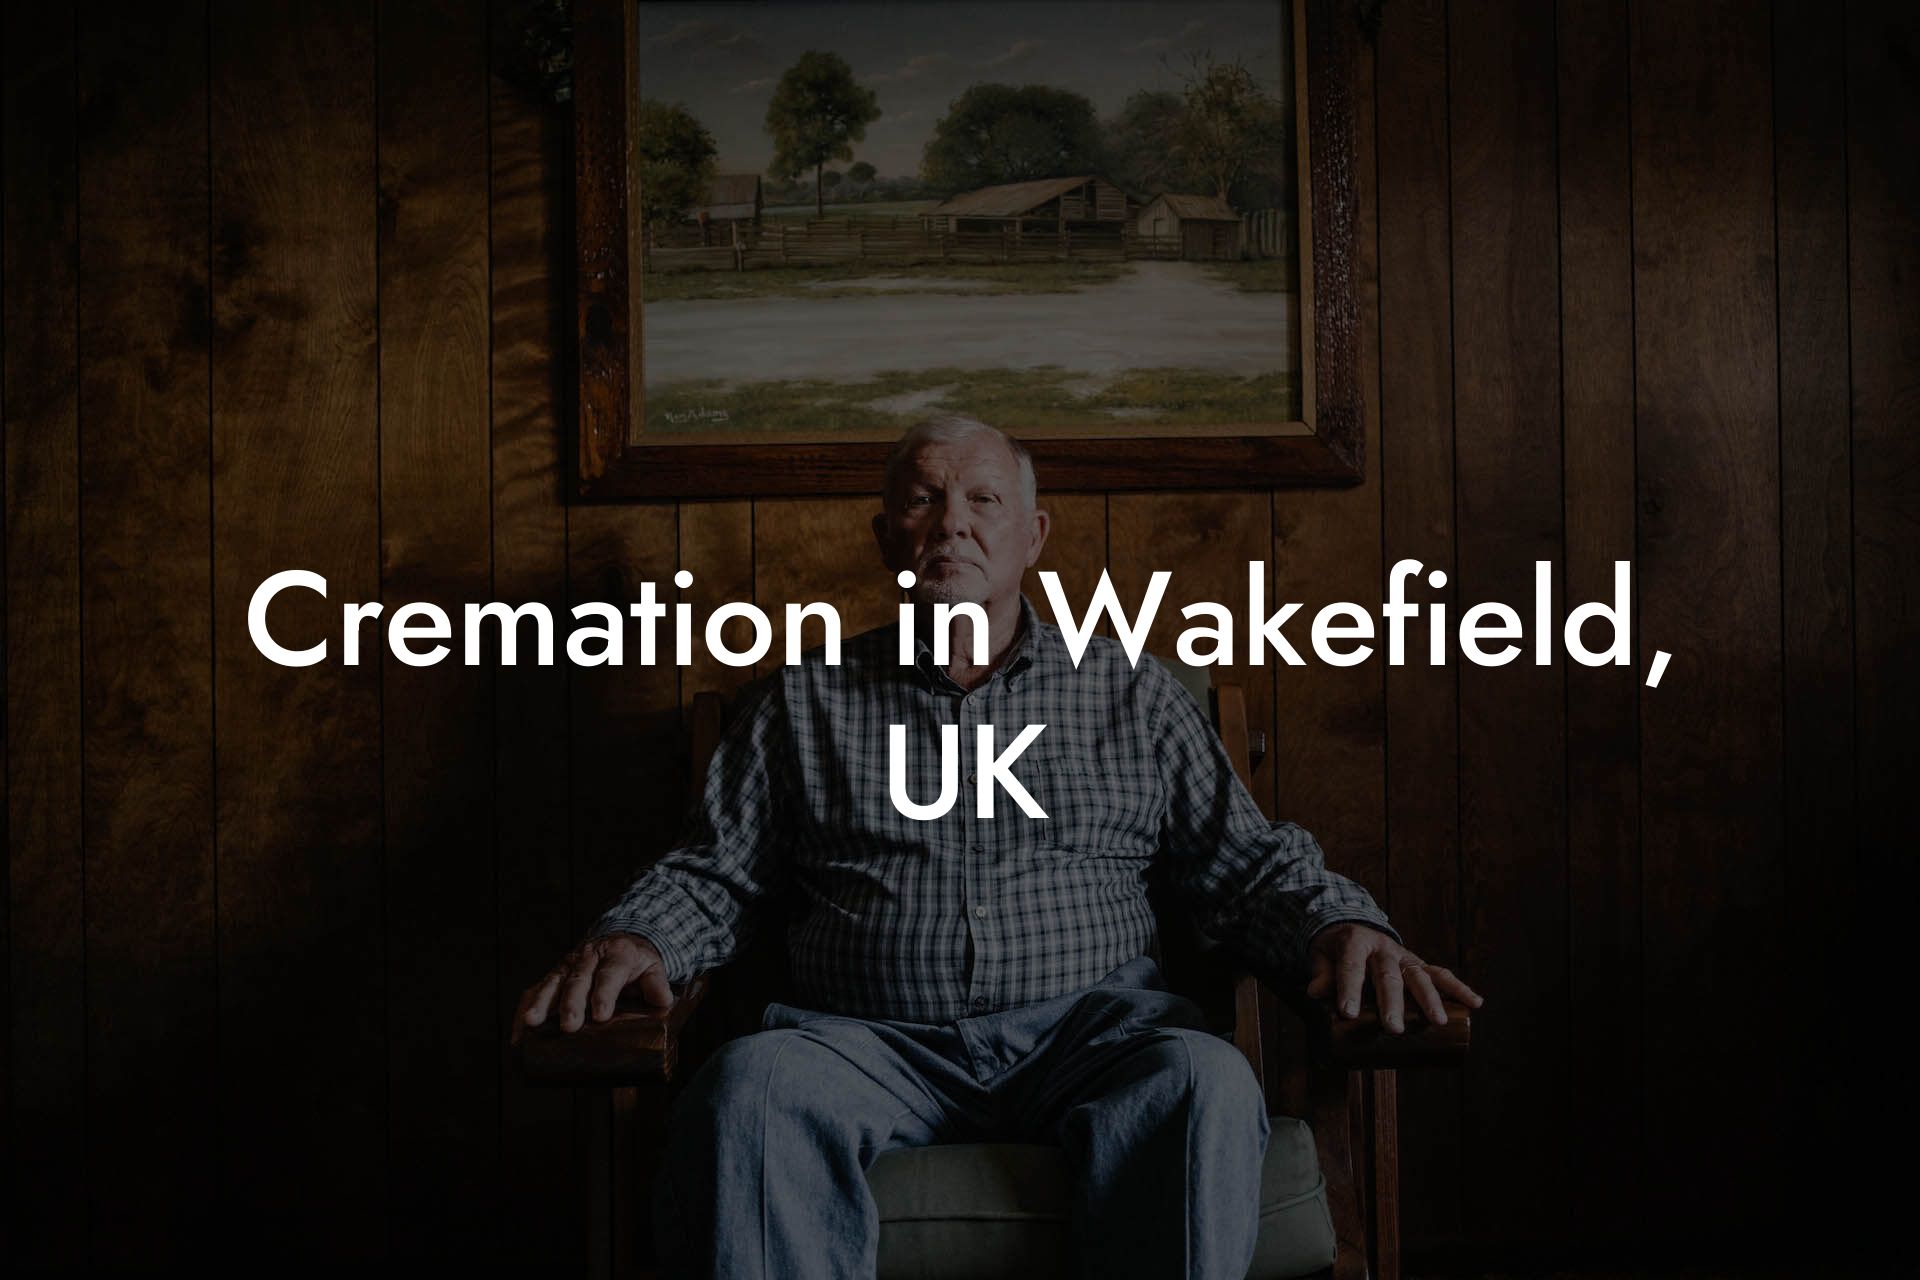 Cremation in Wakefield, UK